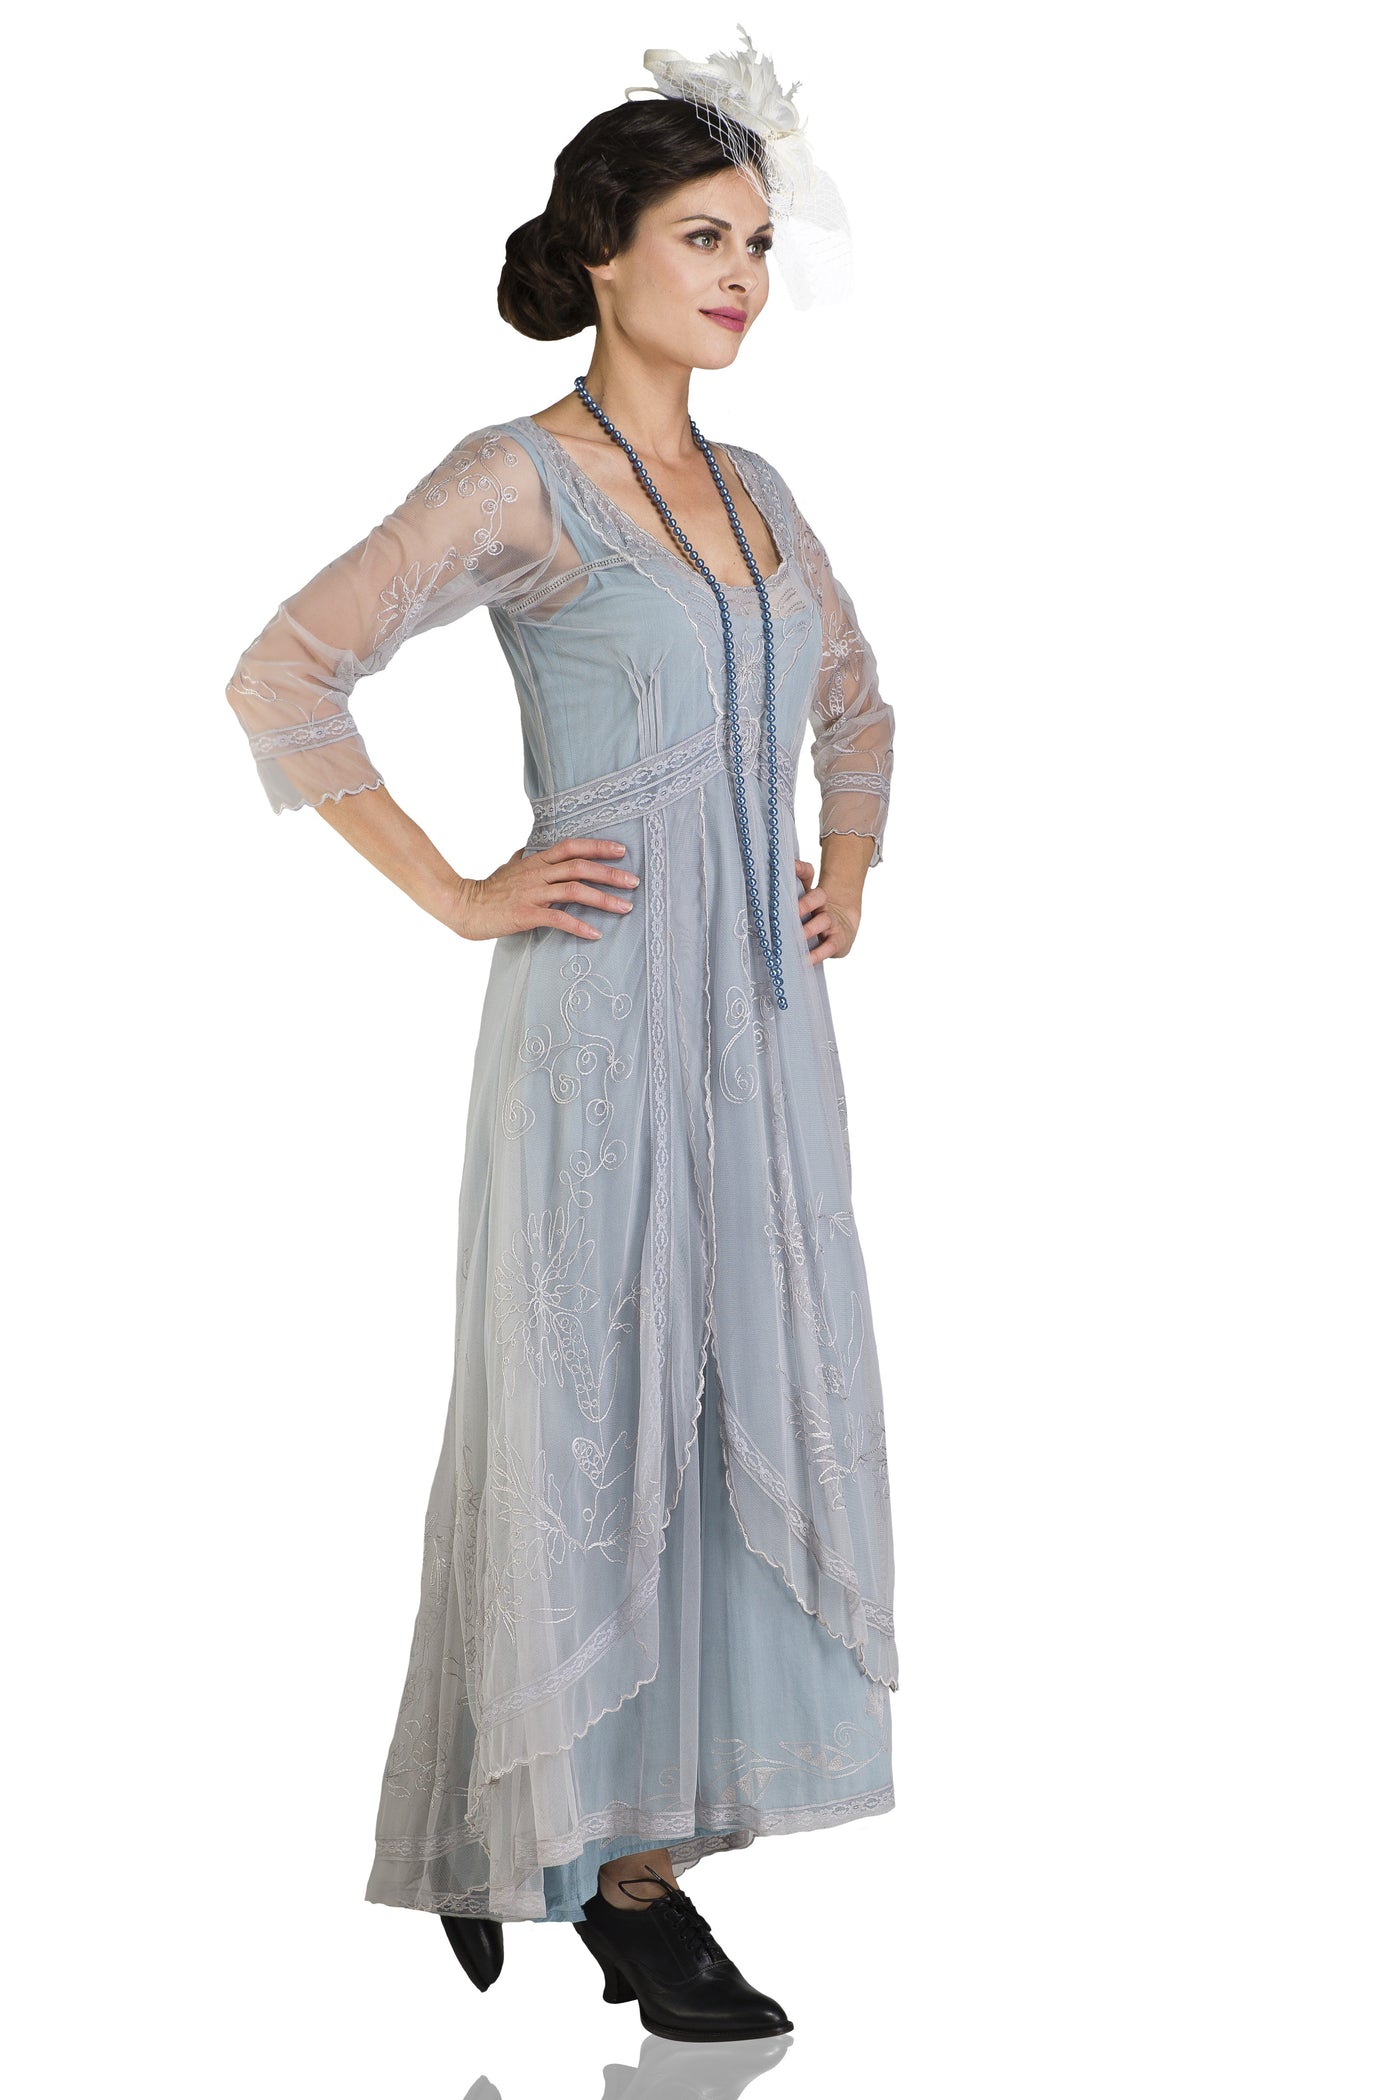 Downton Abbey Tea Party Gown 40163 in Sunrise by Nataya